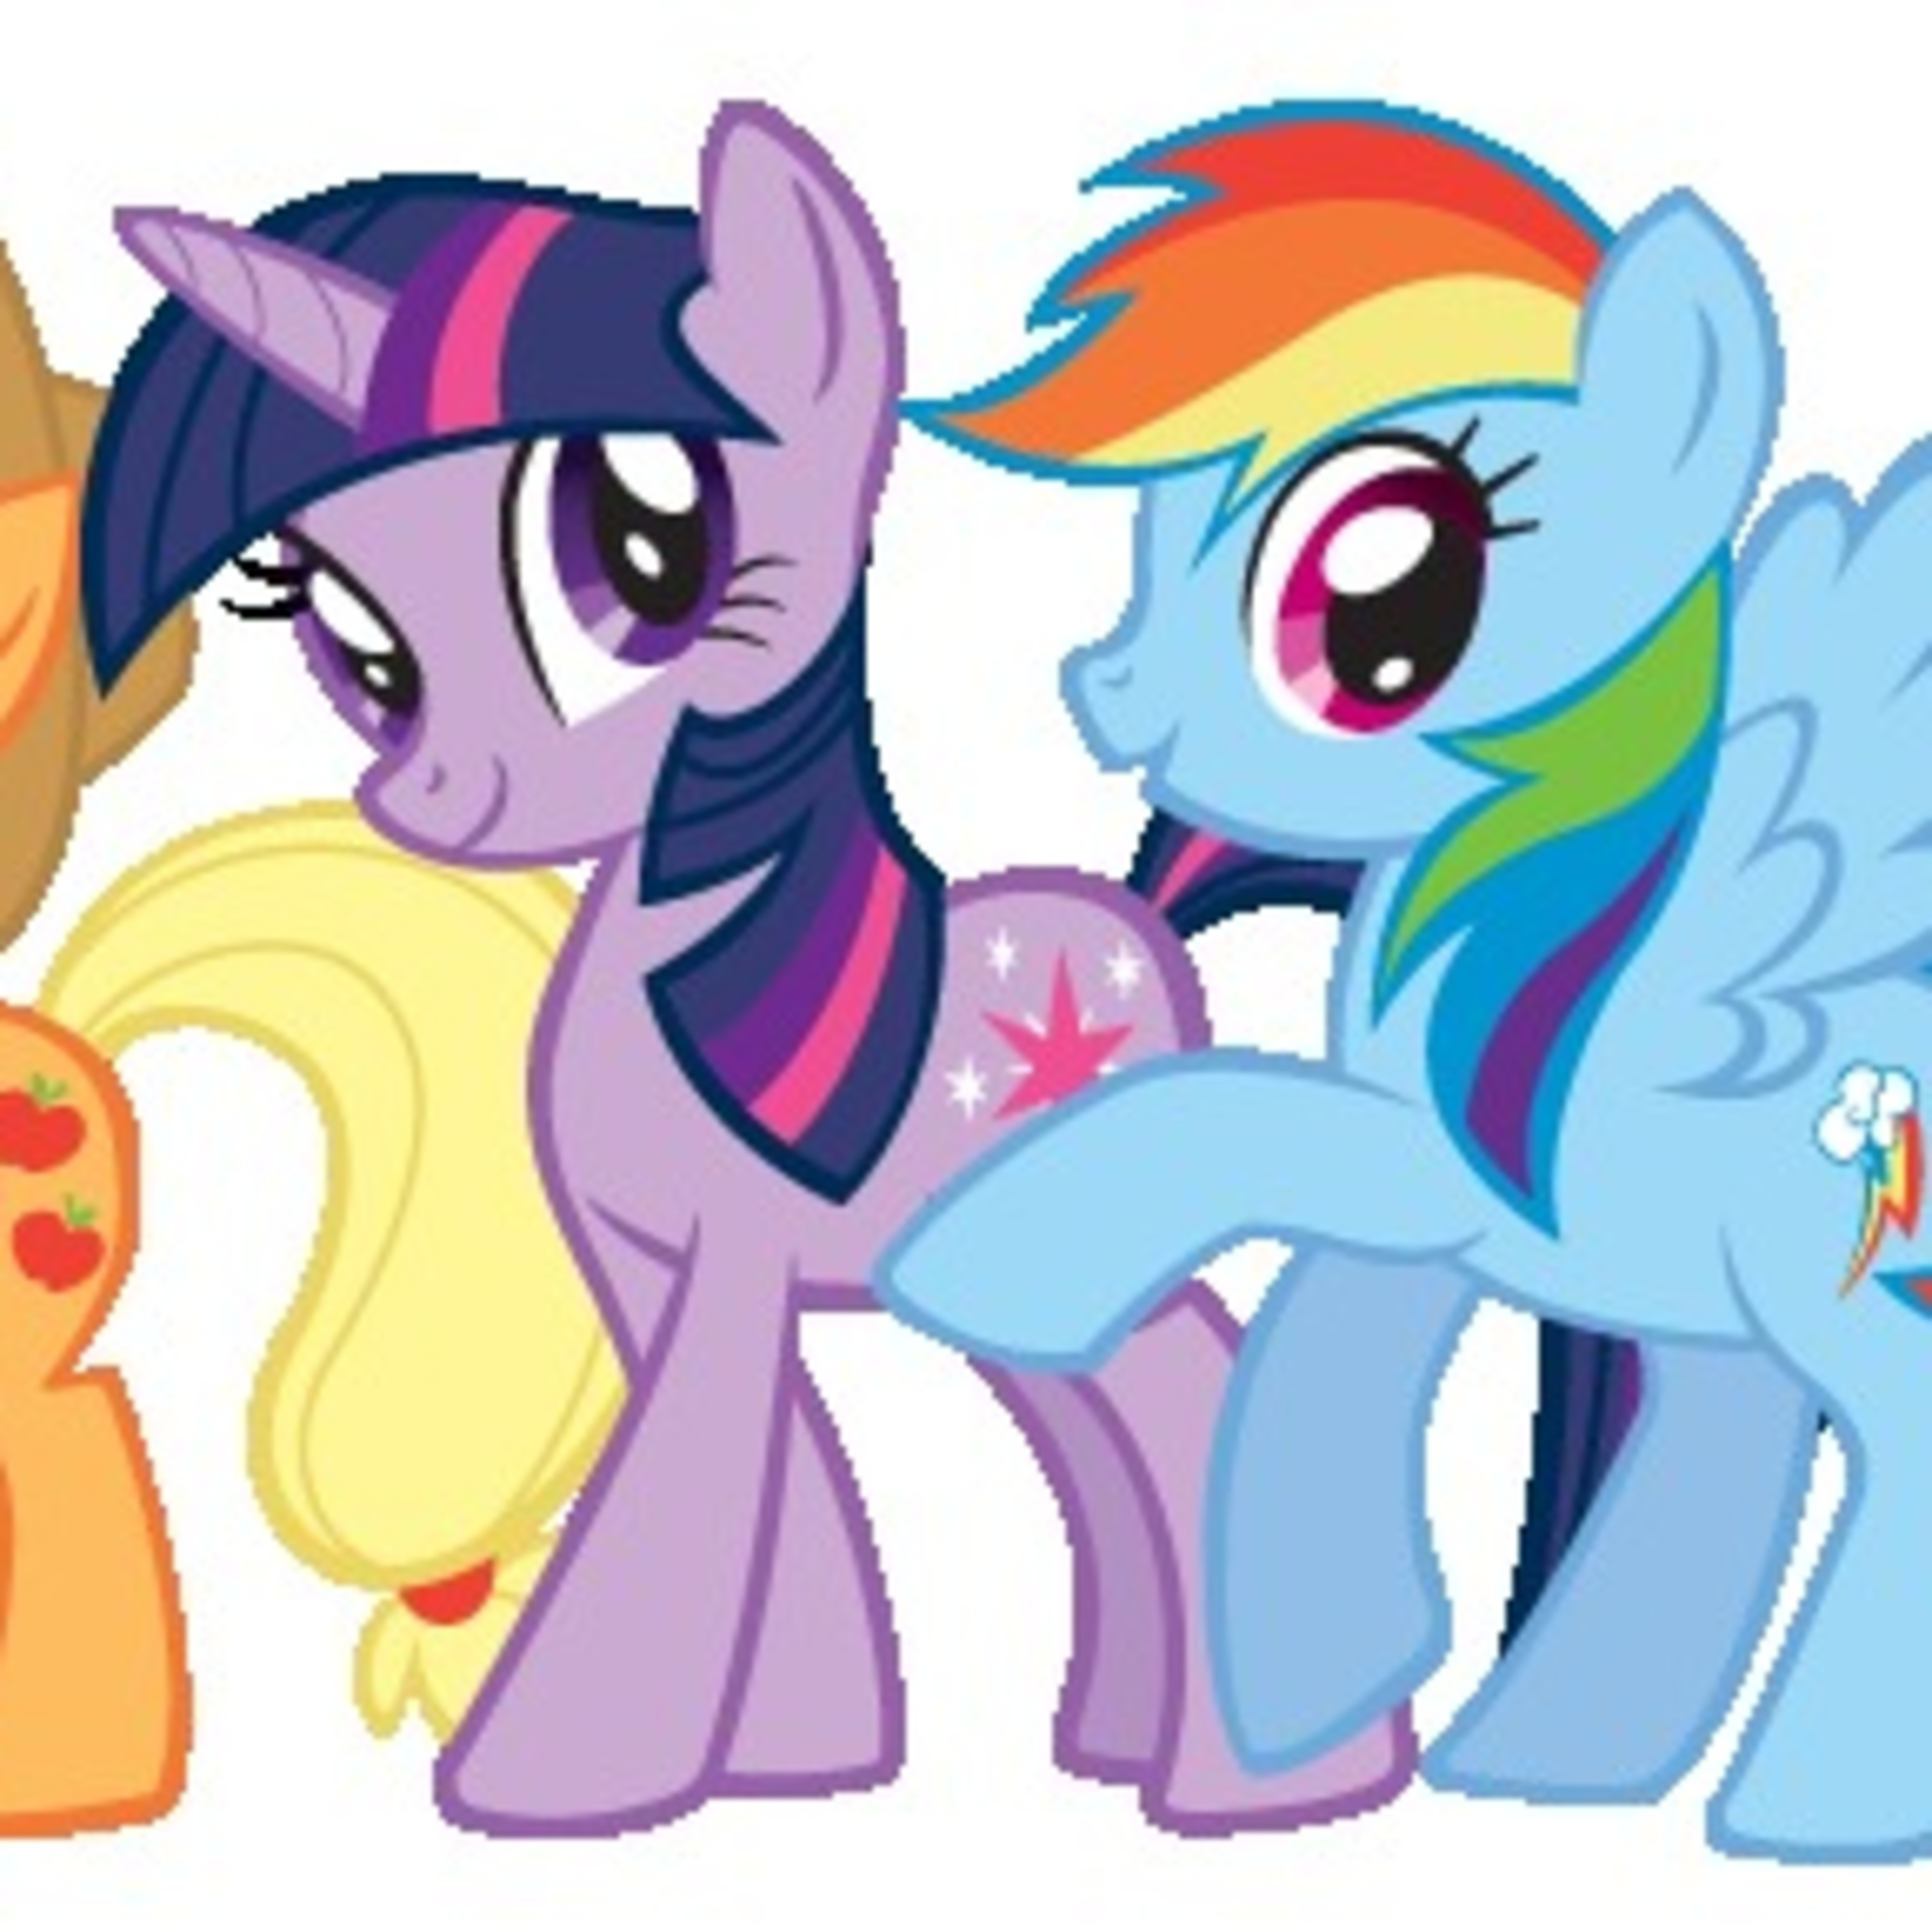 MLP Podcast 2: Friendship Is Magic Part 1 My Little Pony podcast